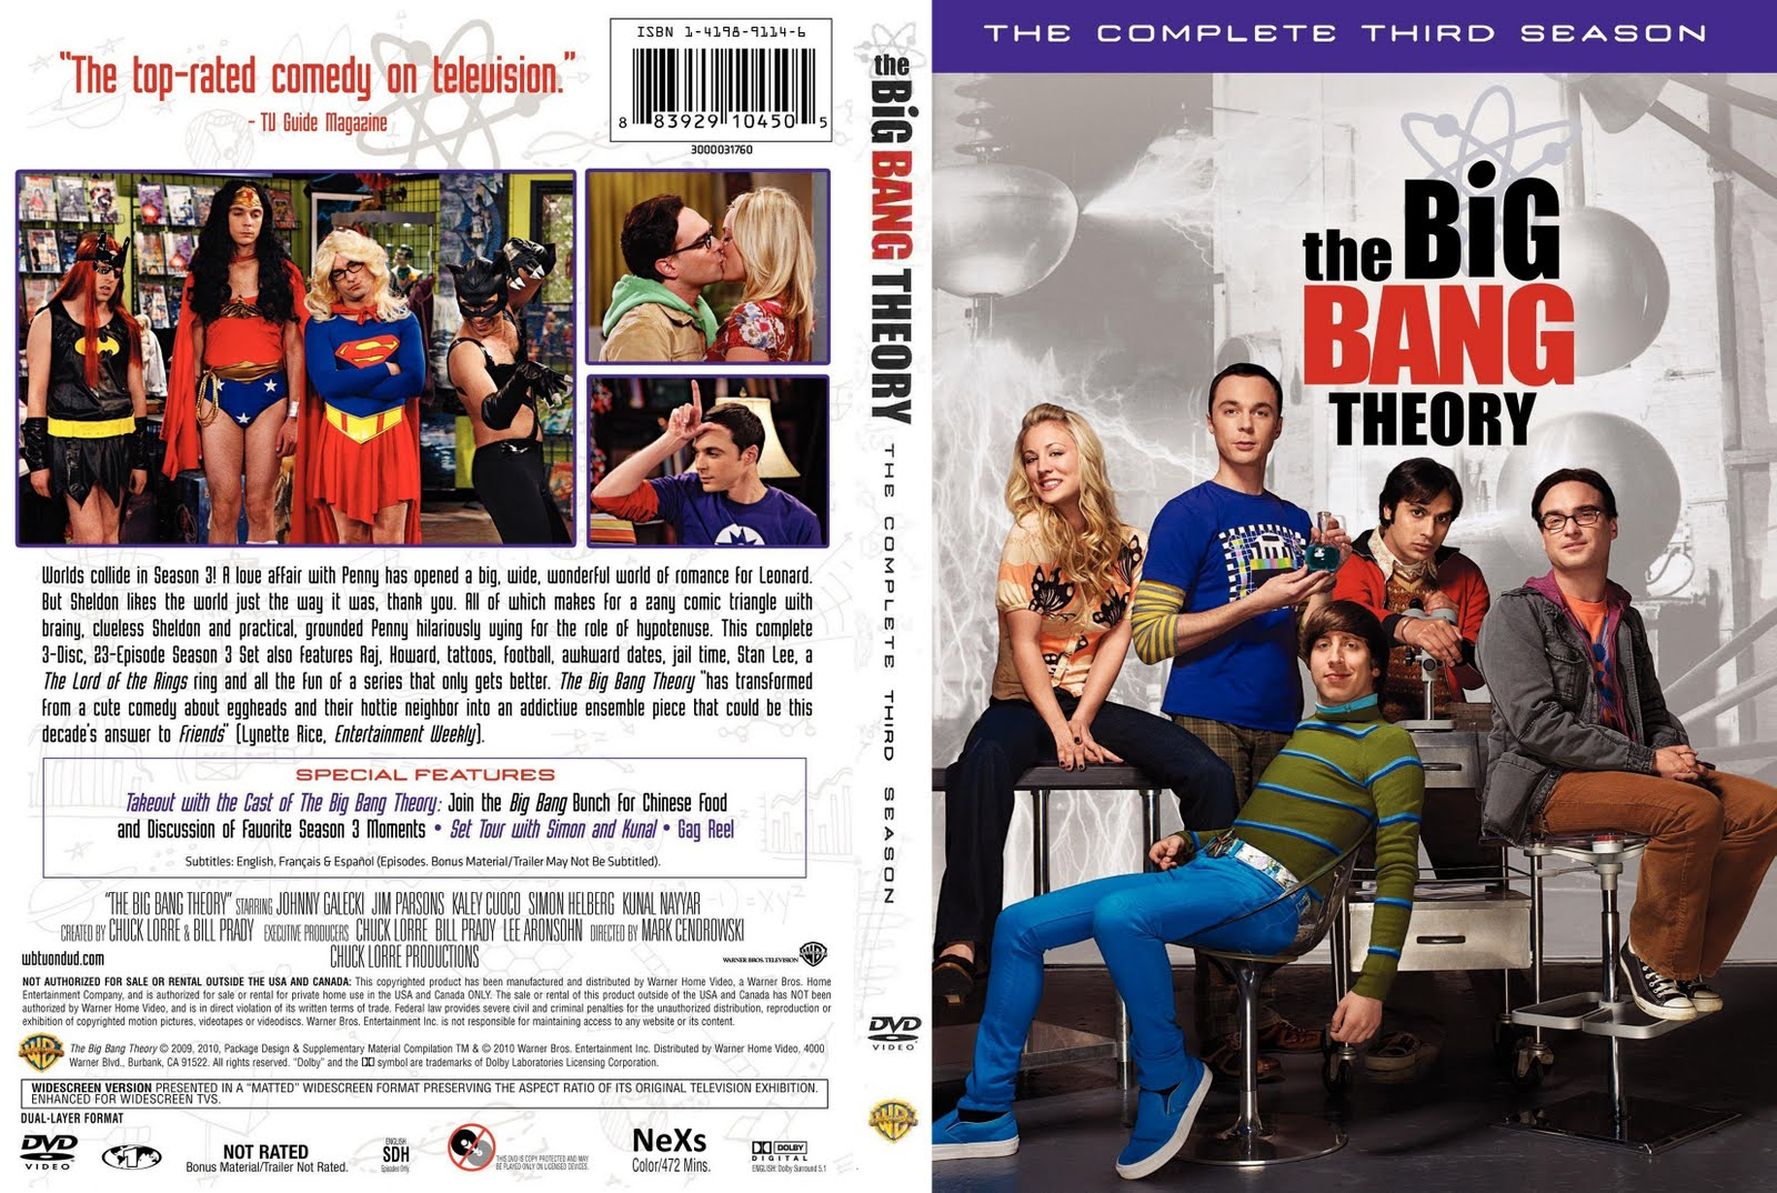 Jaquette DVD The Big Bang Theory Saison 3 Zone 1